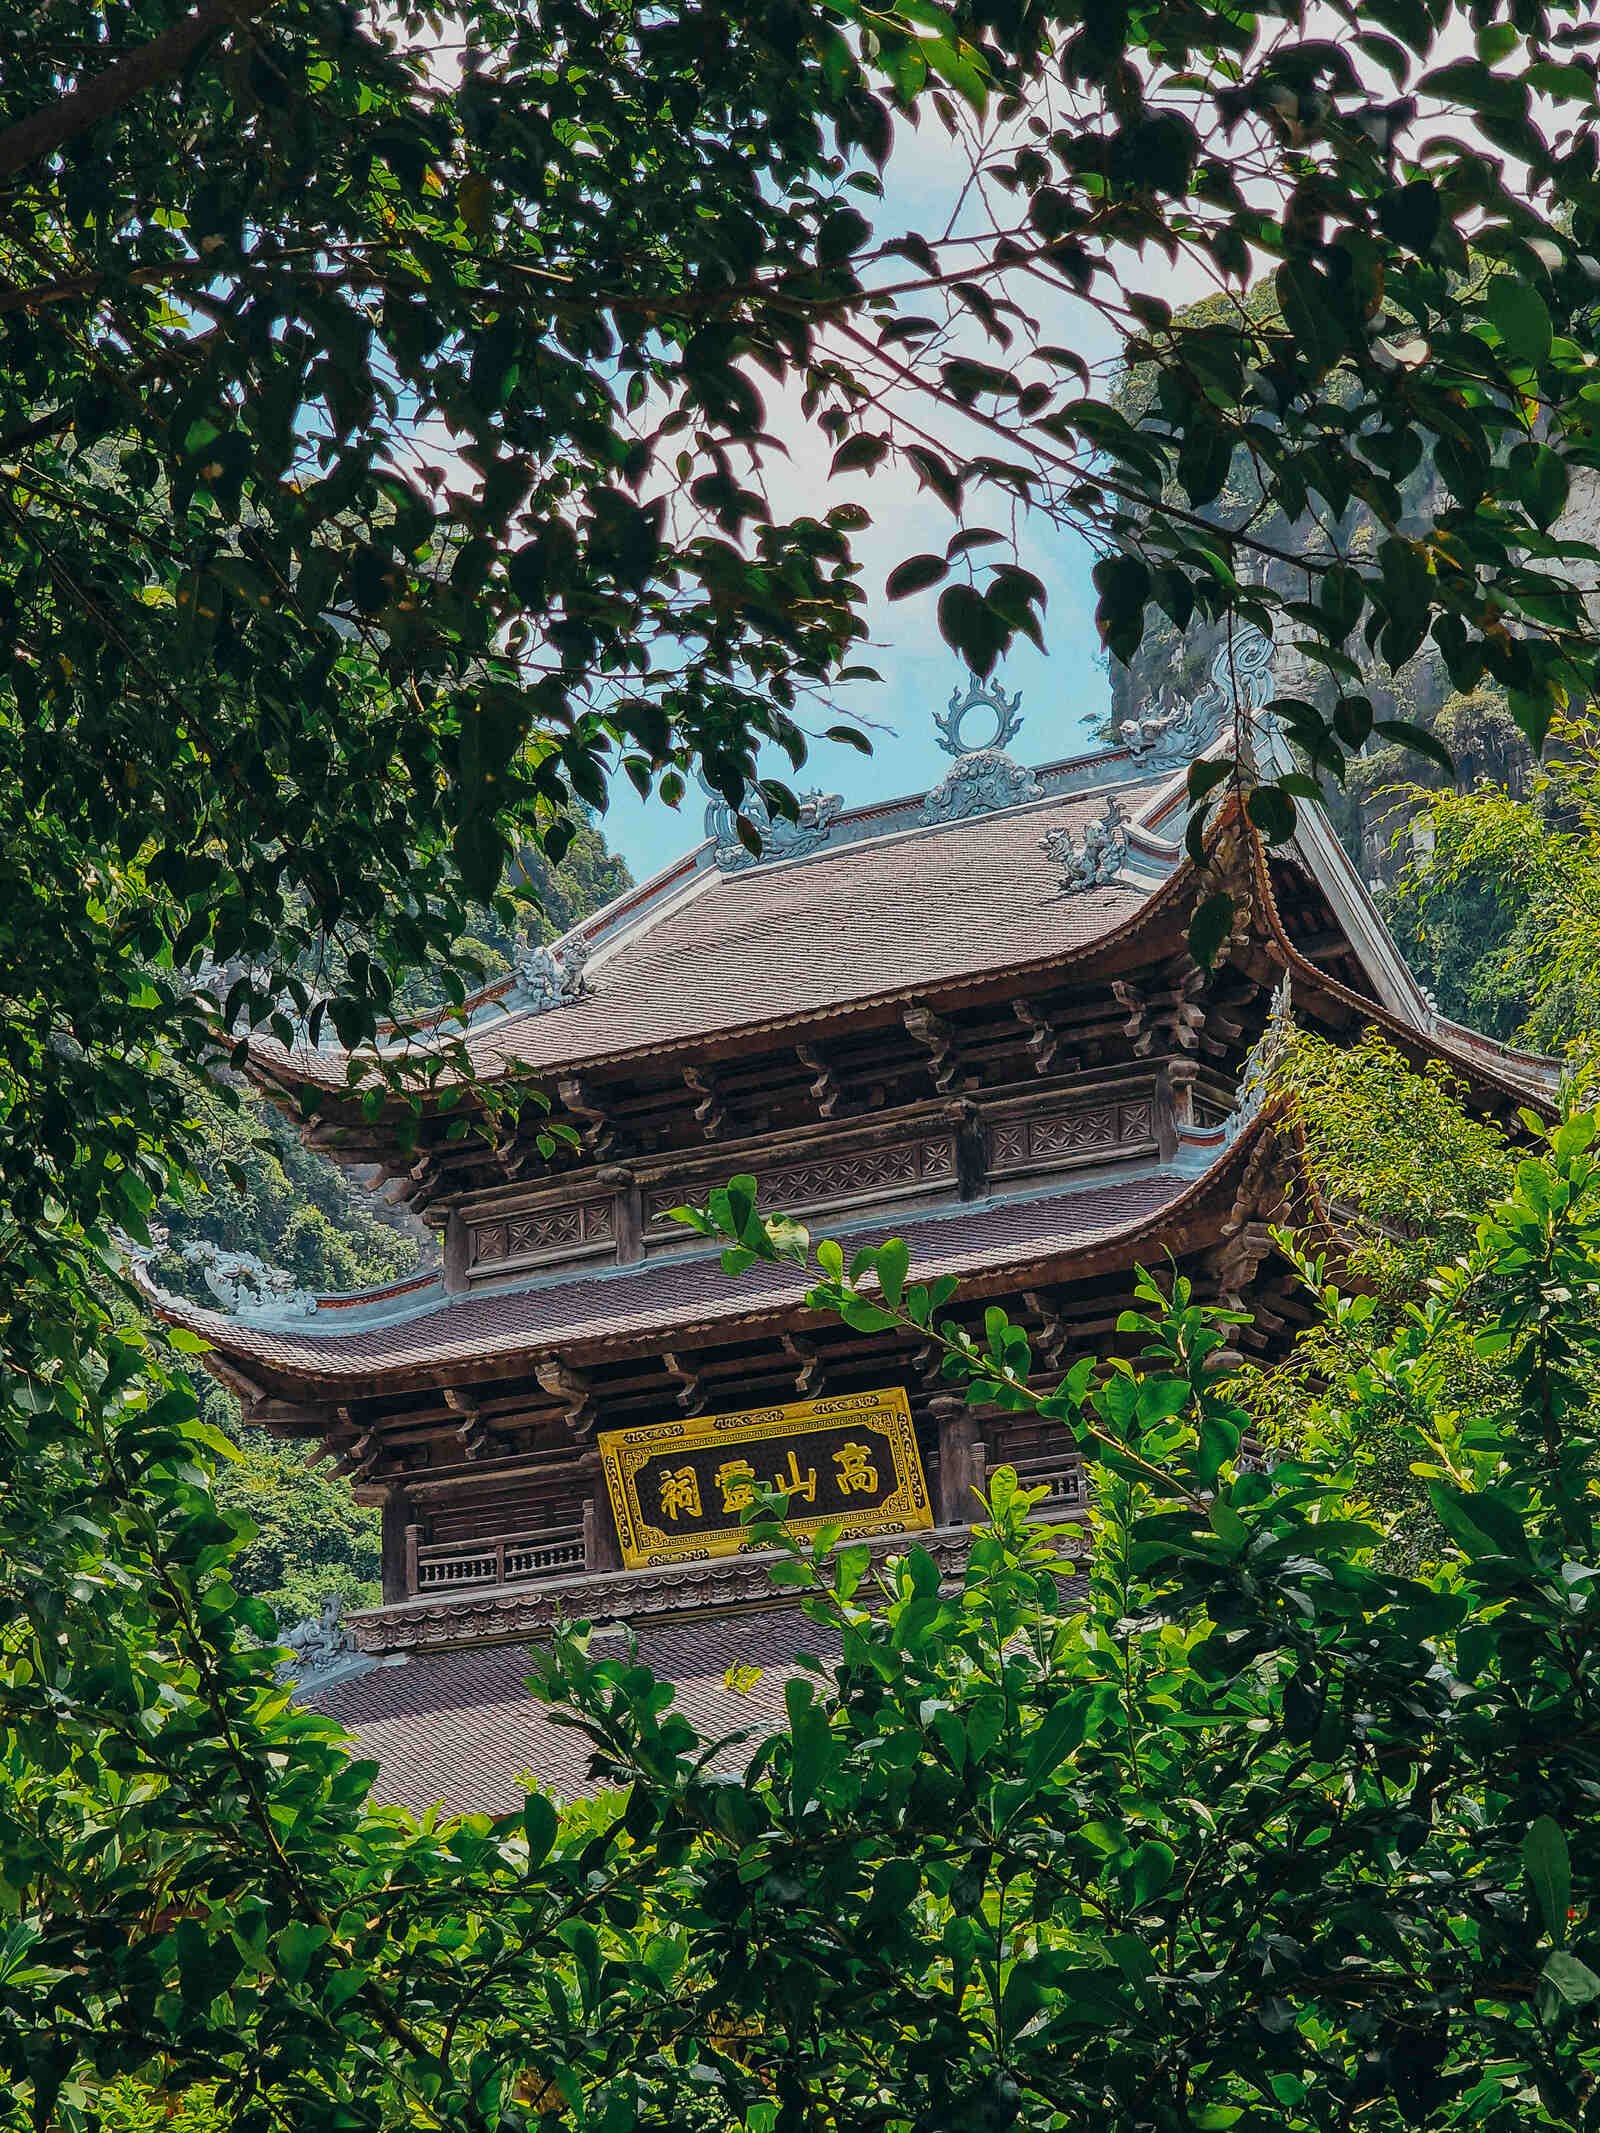 a wooden pagoda surrounded by leafy green trees